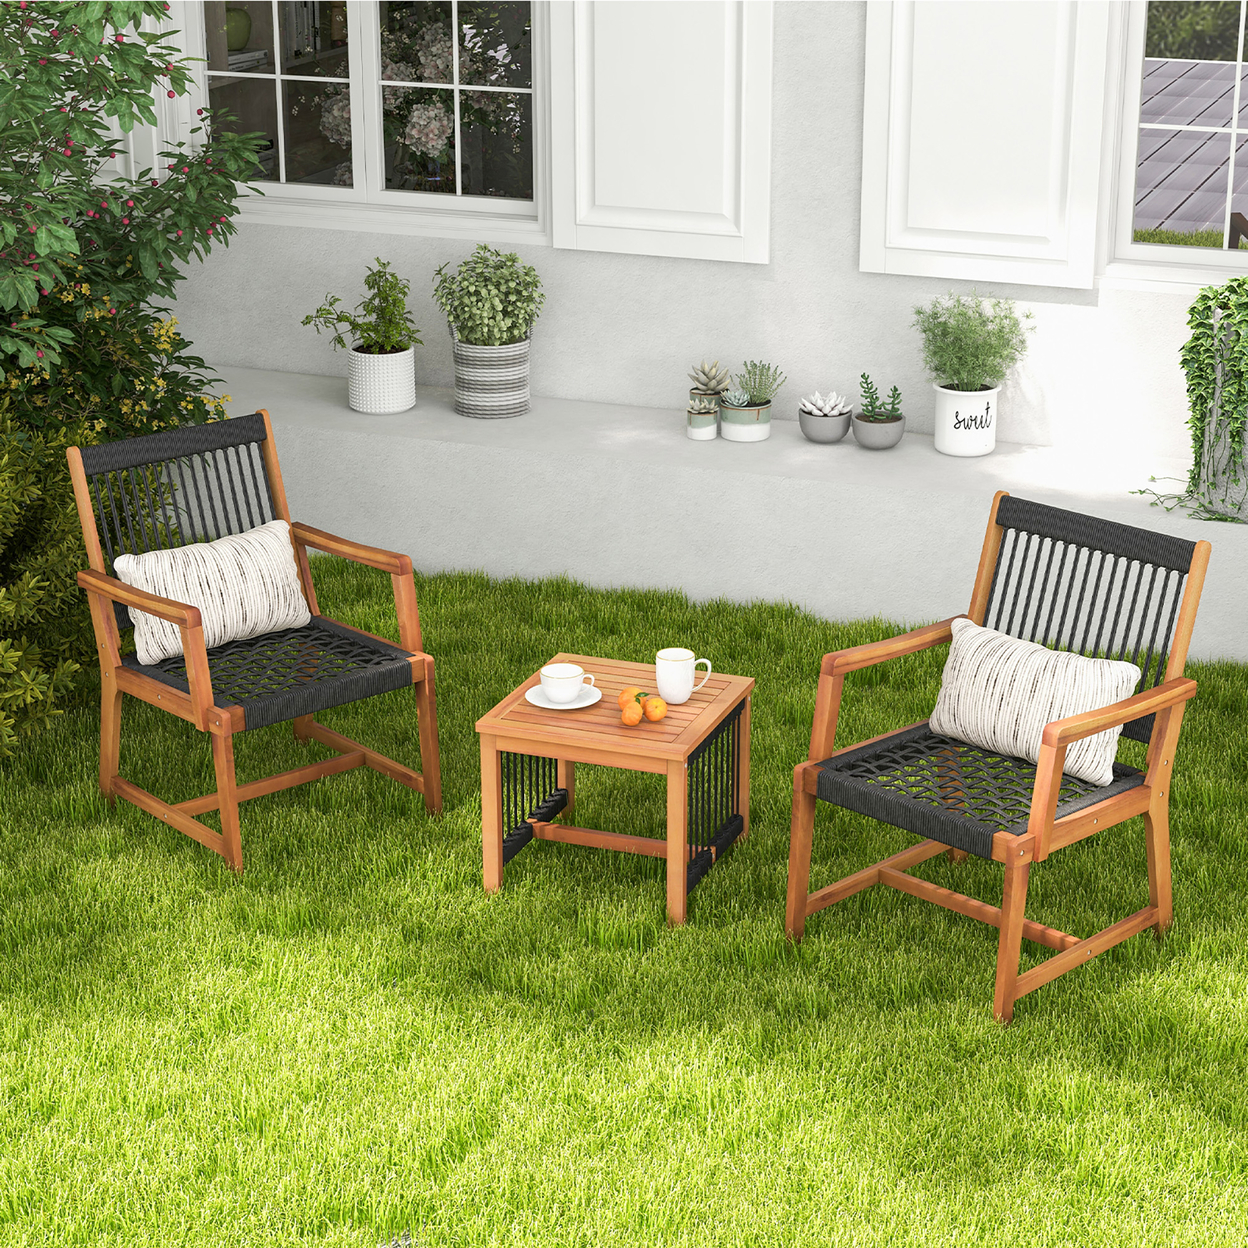 3 PCS Solid Acacia Wood Patio Set All-Weather Rope Woven Chair Garden Poolside